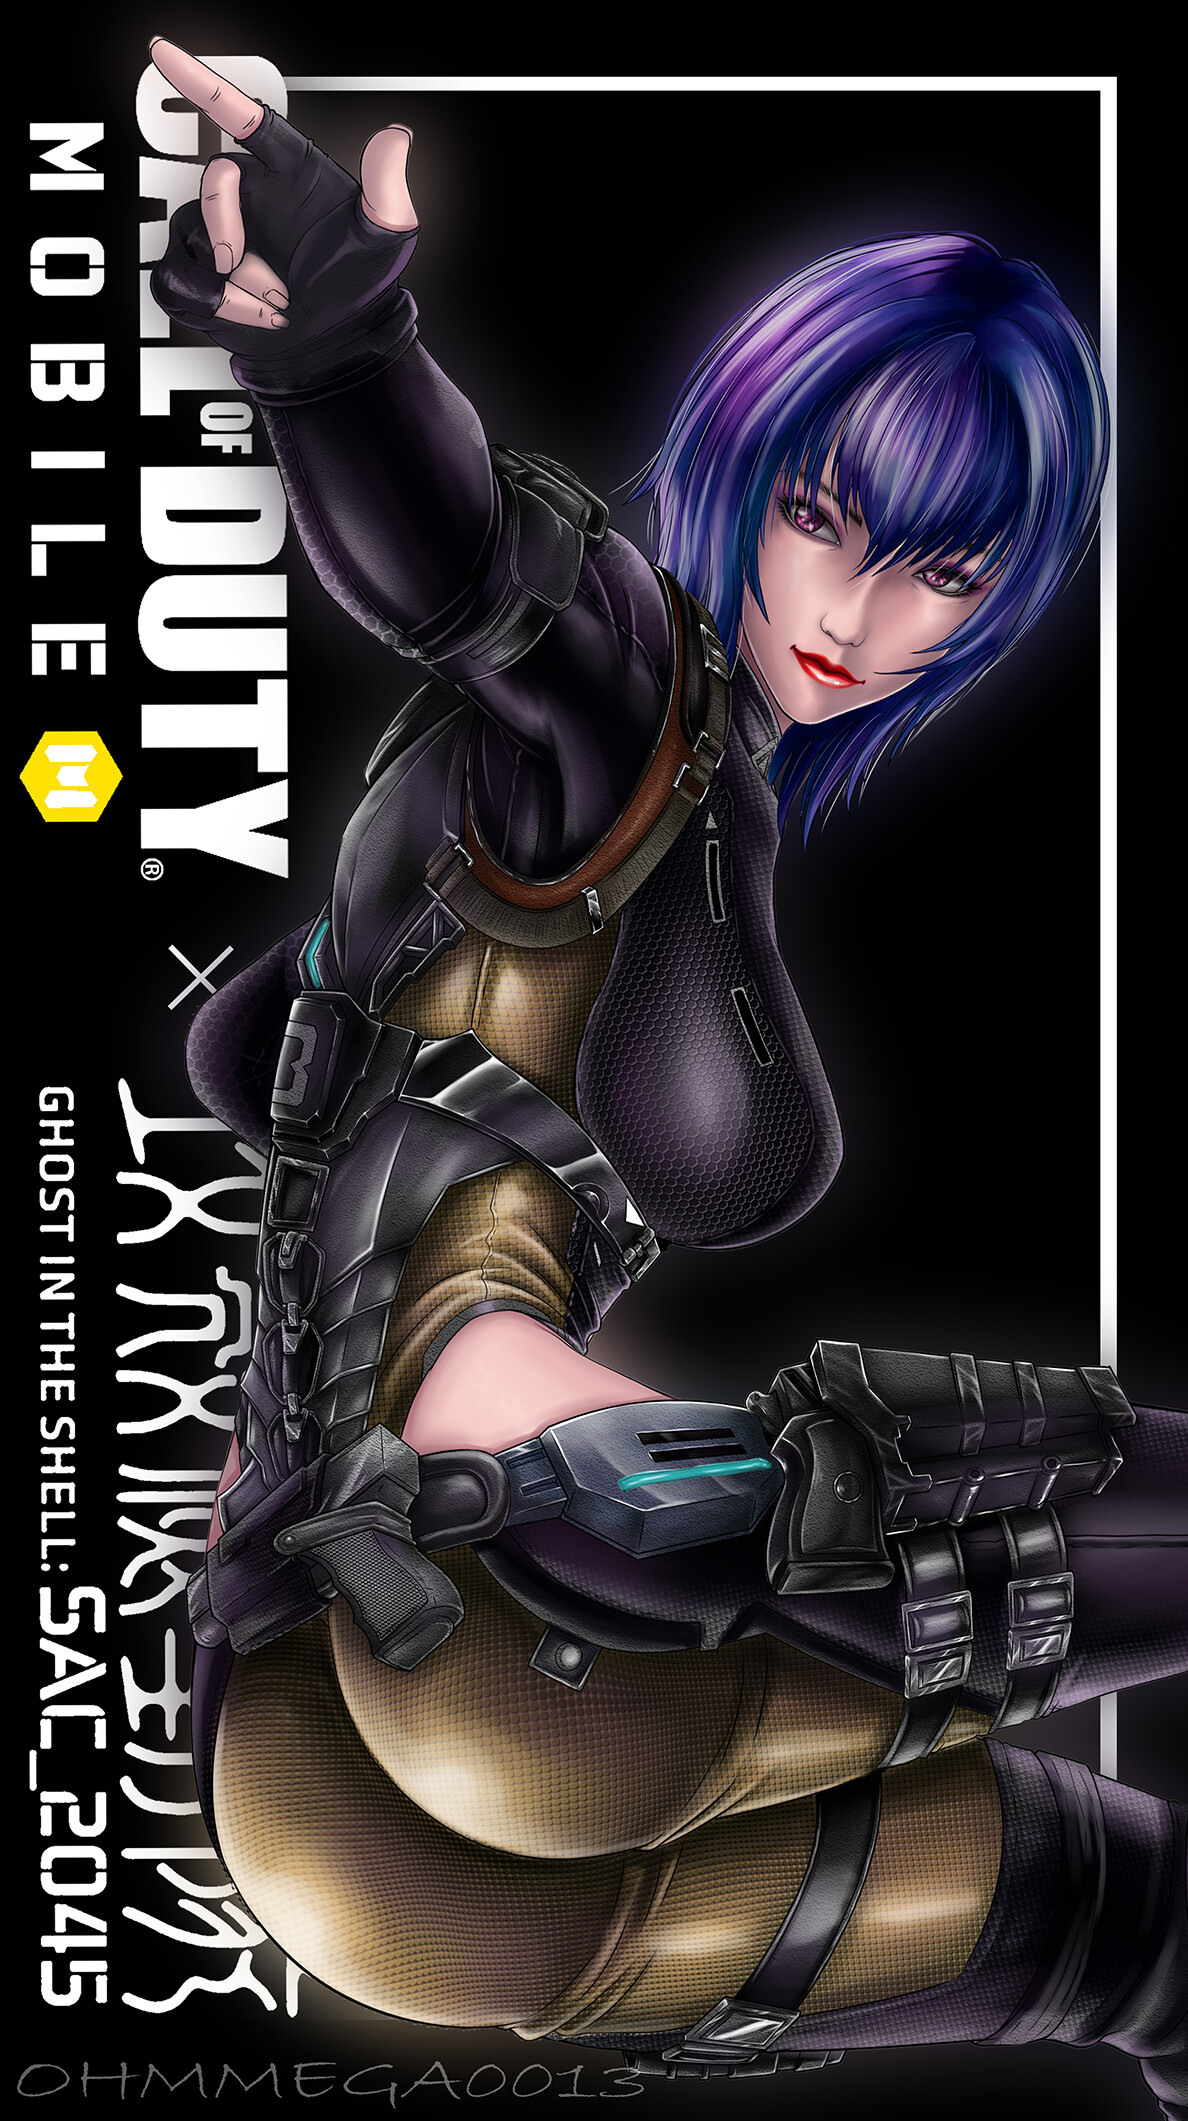 Motoko - Ghost in the Shell (Call of Duty Mobile-fan art) by ohmmega0013